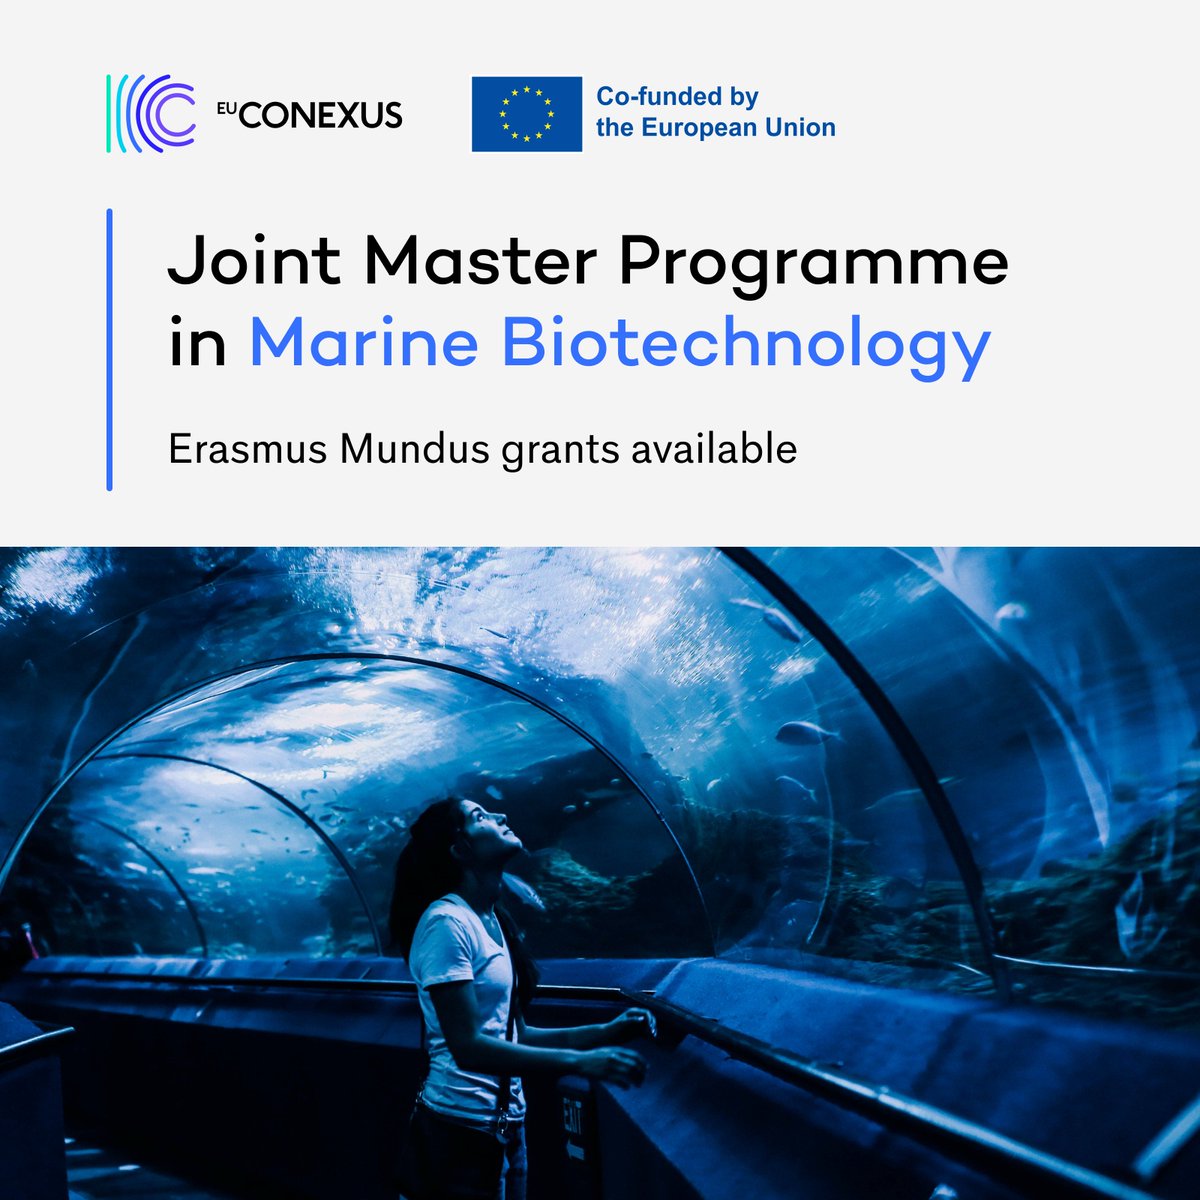 Dive into Marine Biotech! Apply now for the Joint Master’s! 💰 Erasmus Mundus scholarships Jan 31st 🌐Create your Euro network 🛠️ #BlueBiotech research awaits! ✈️ Explore multiple travel options 🌟 More infohttps://www.eu-conexus.eu/en/marine-biotechnology/